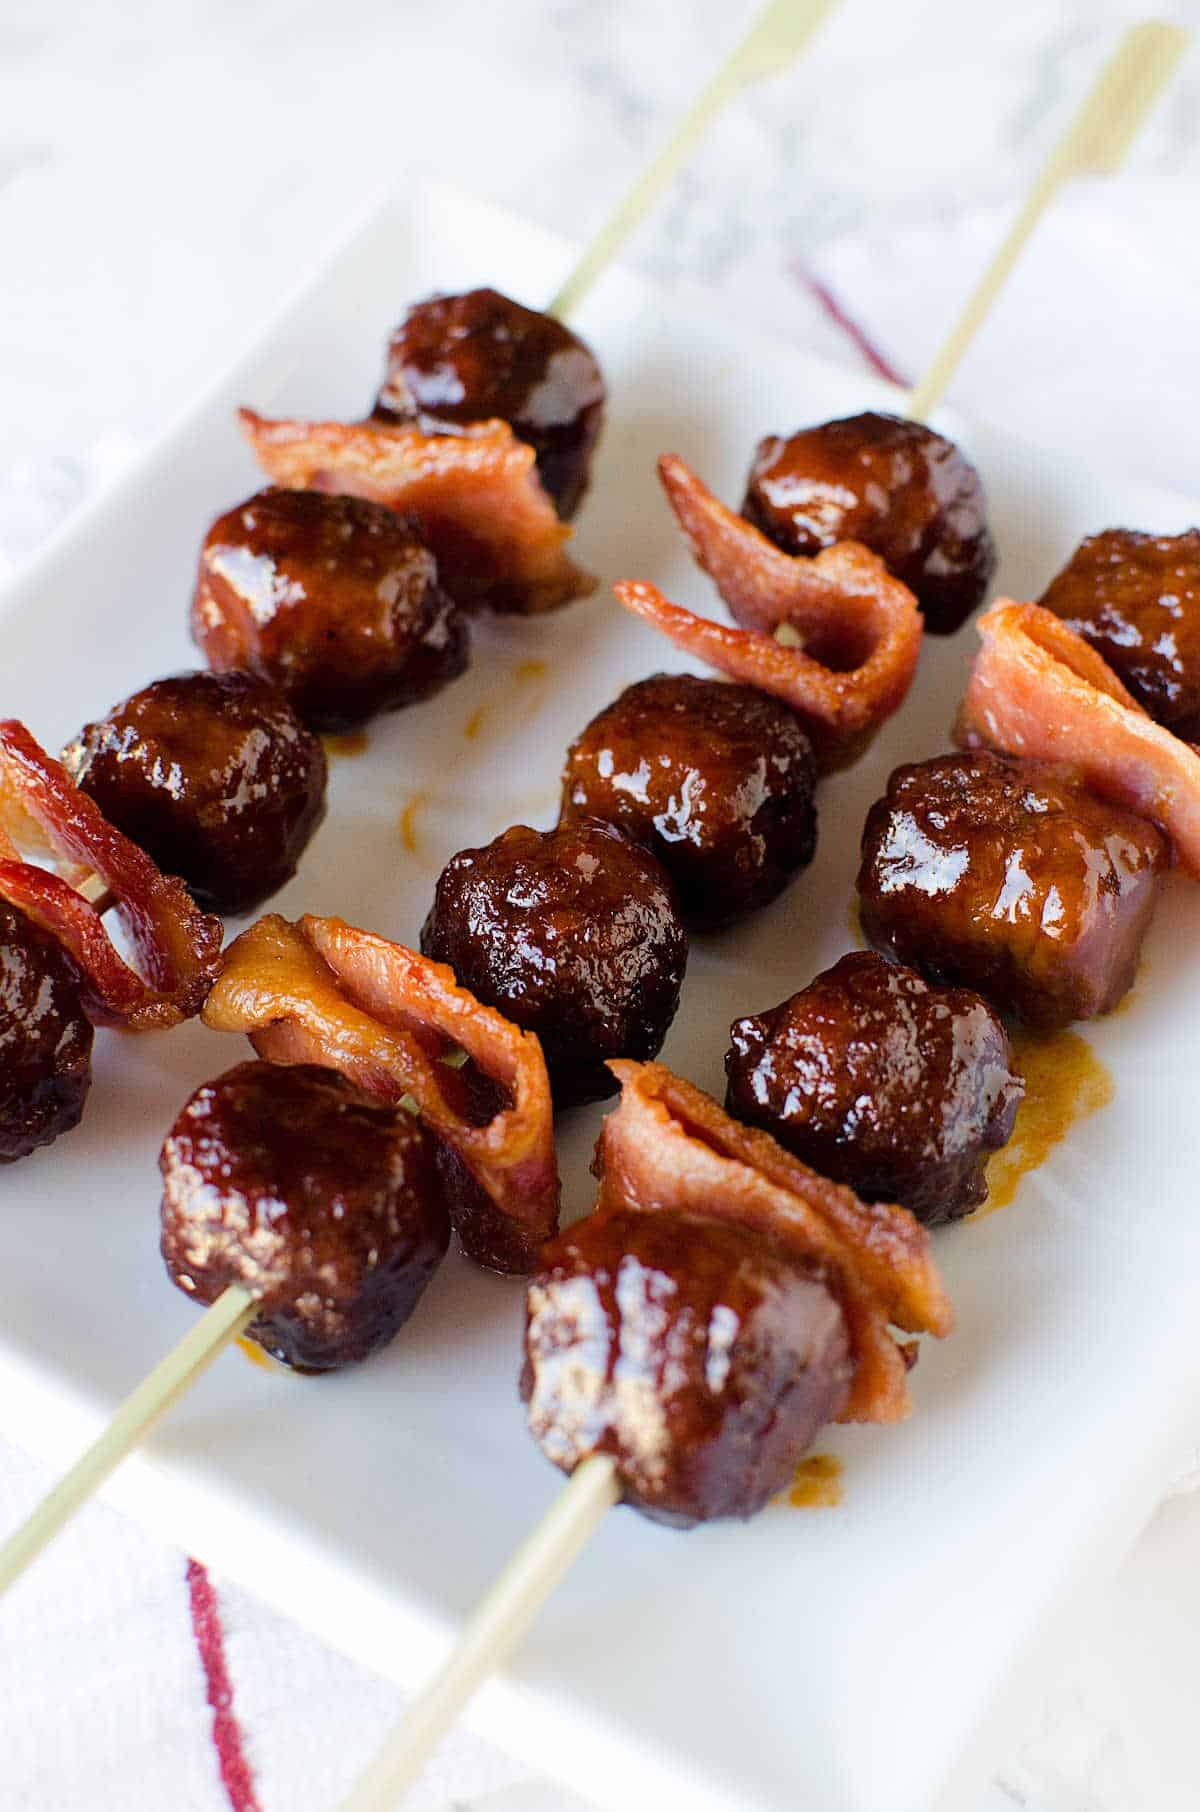 Bacon and bourbon meatballs on wooden skewers in a white plate